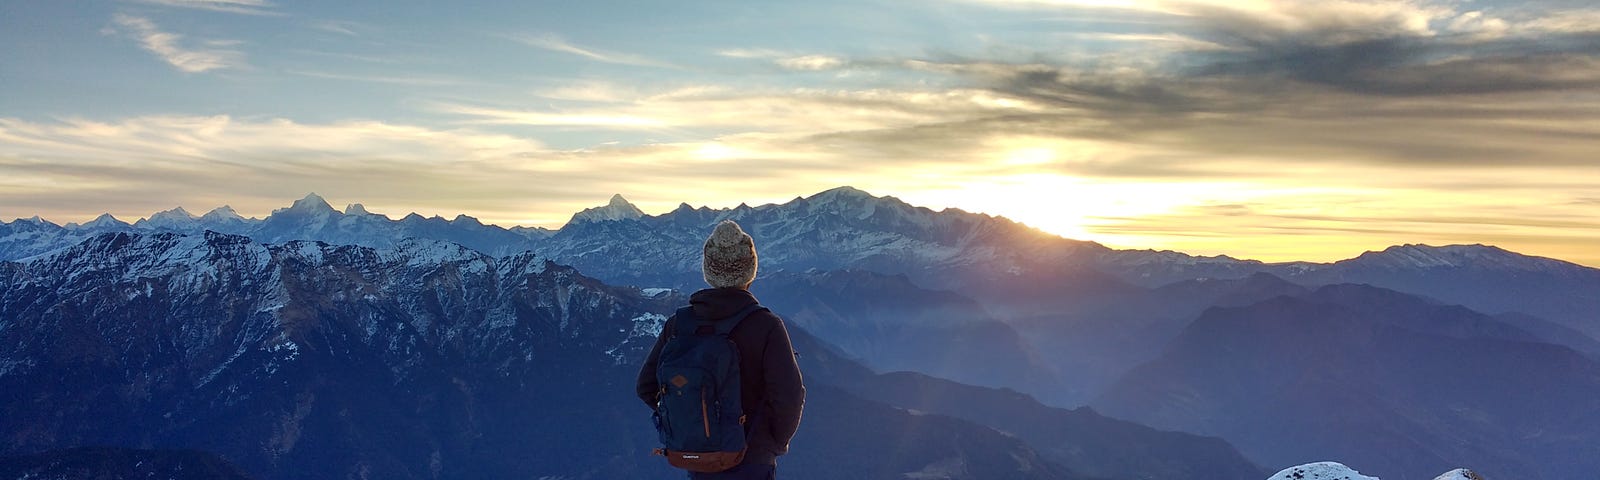 Woman standing on a snow-capped mountain, looking towards the sunrise.